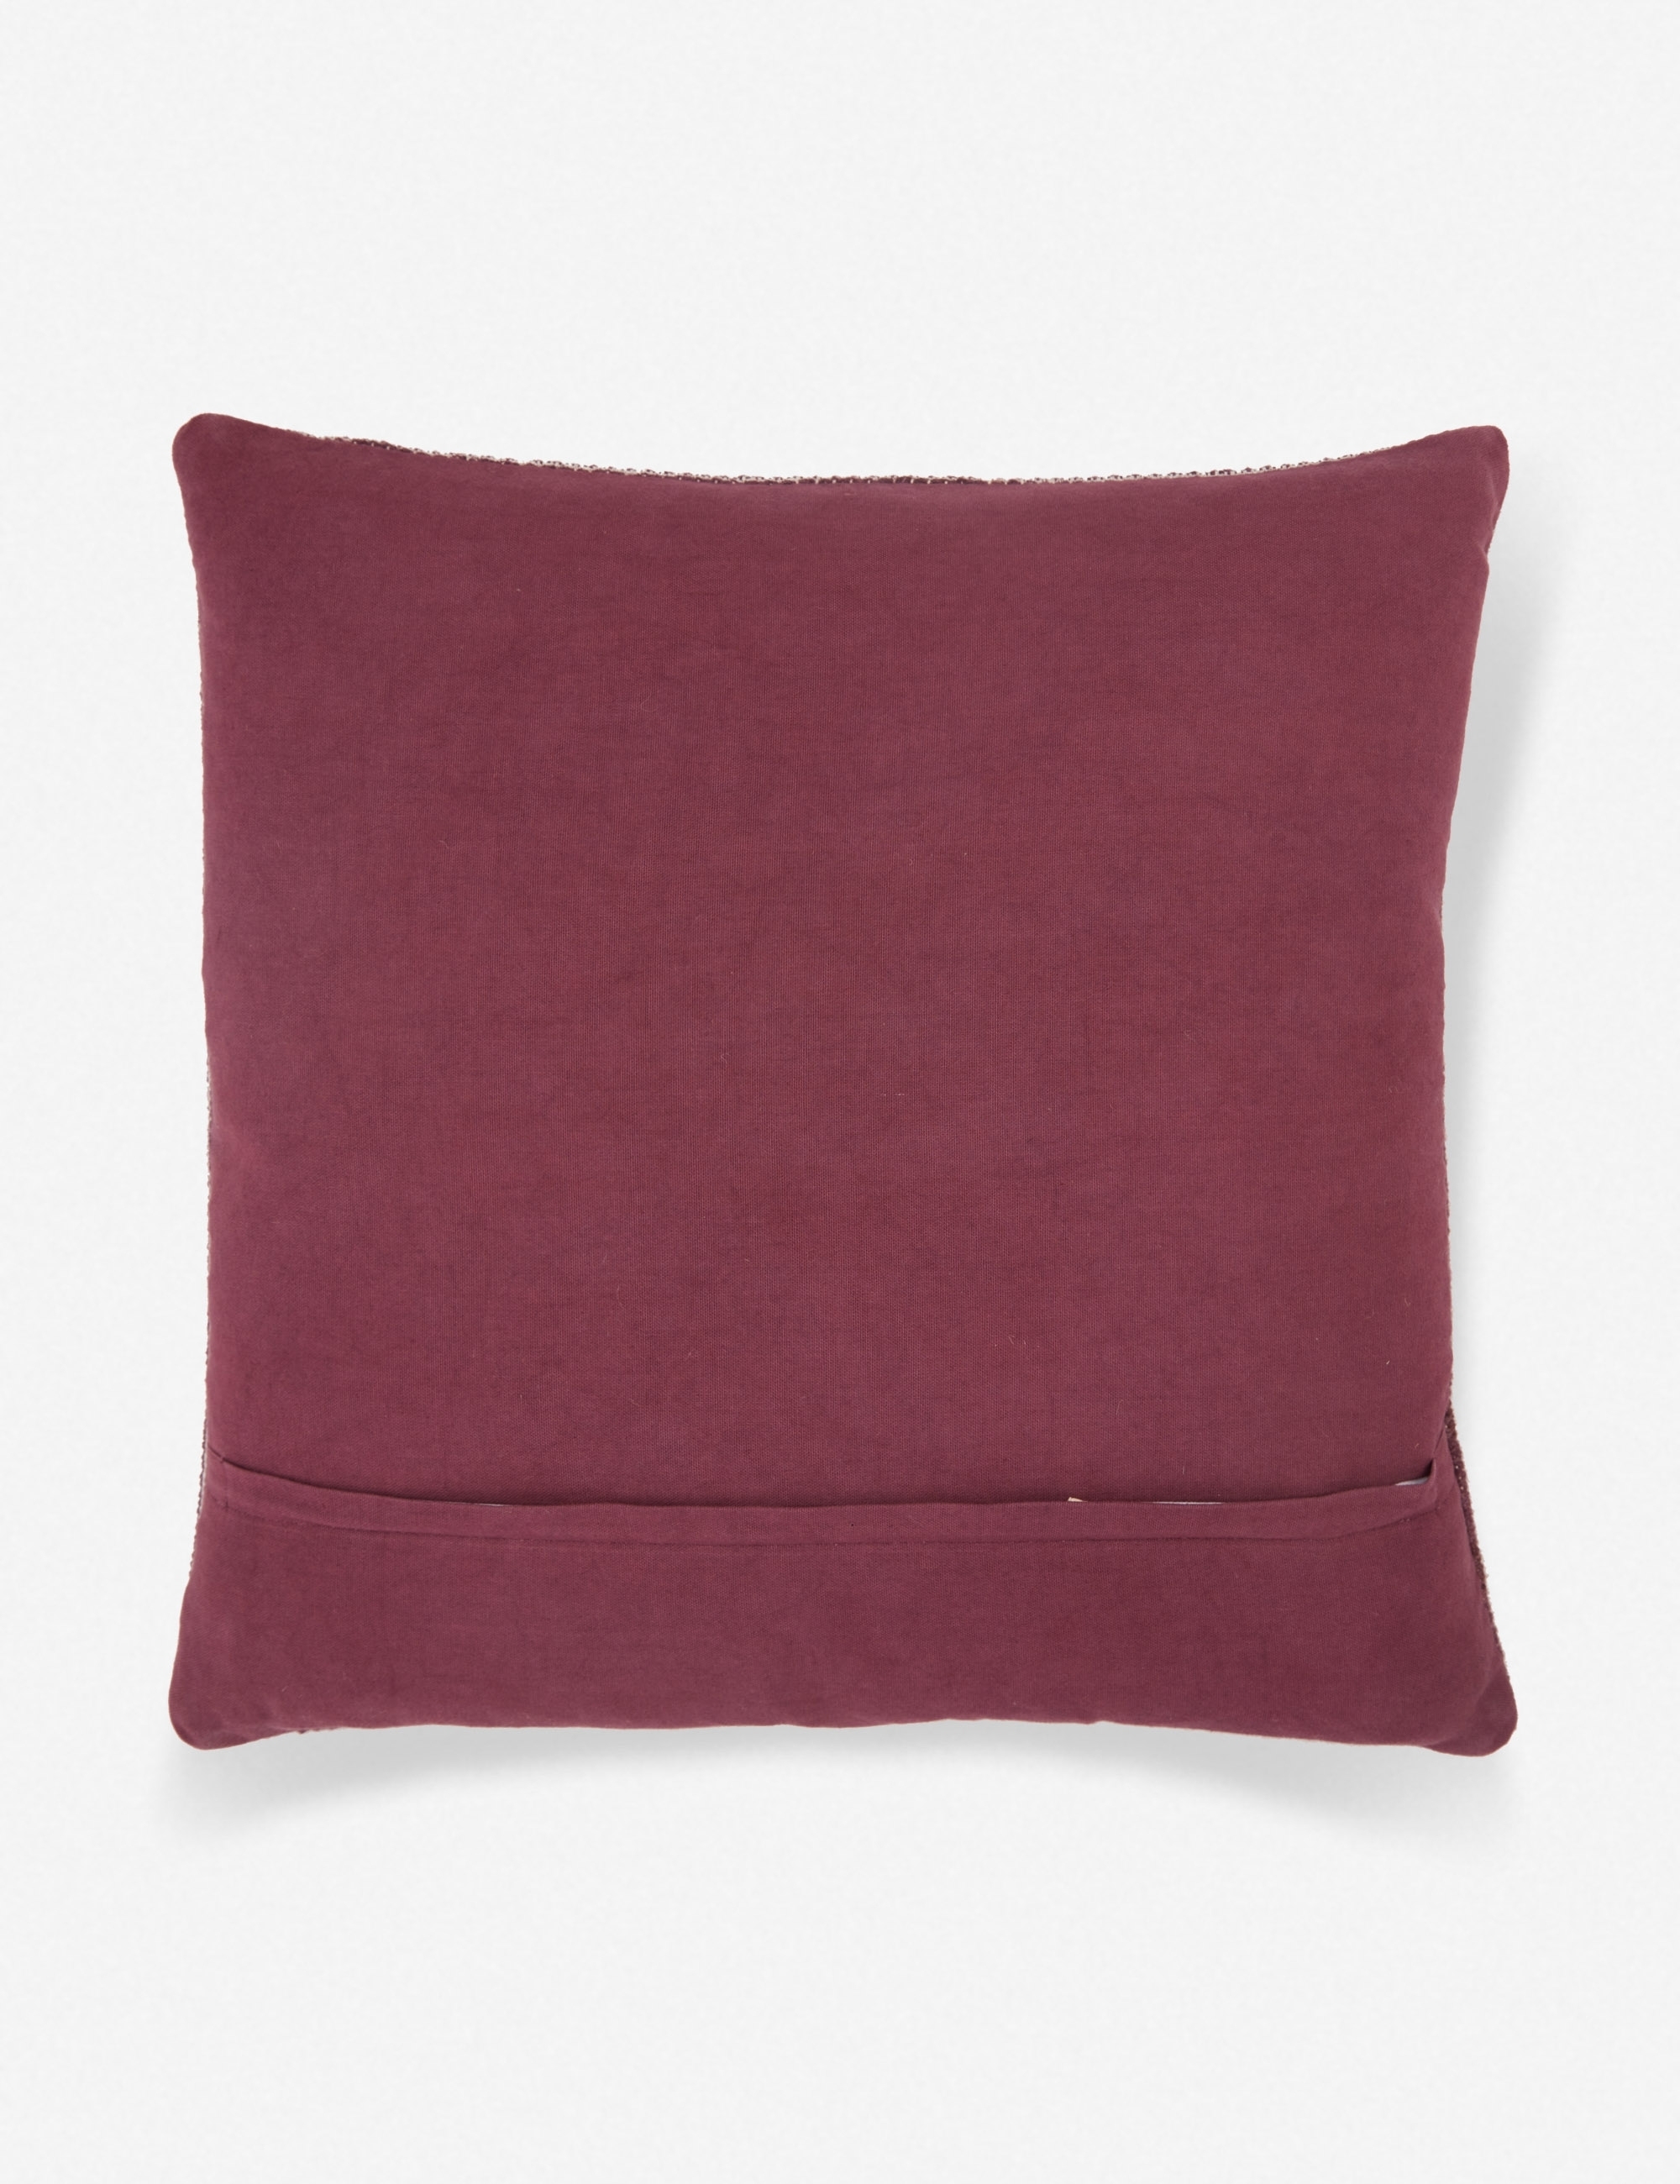 Amerie Pillow - Image 1